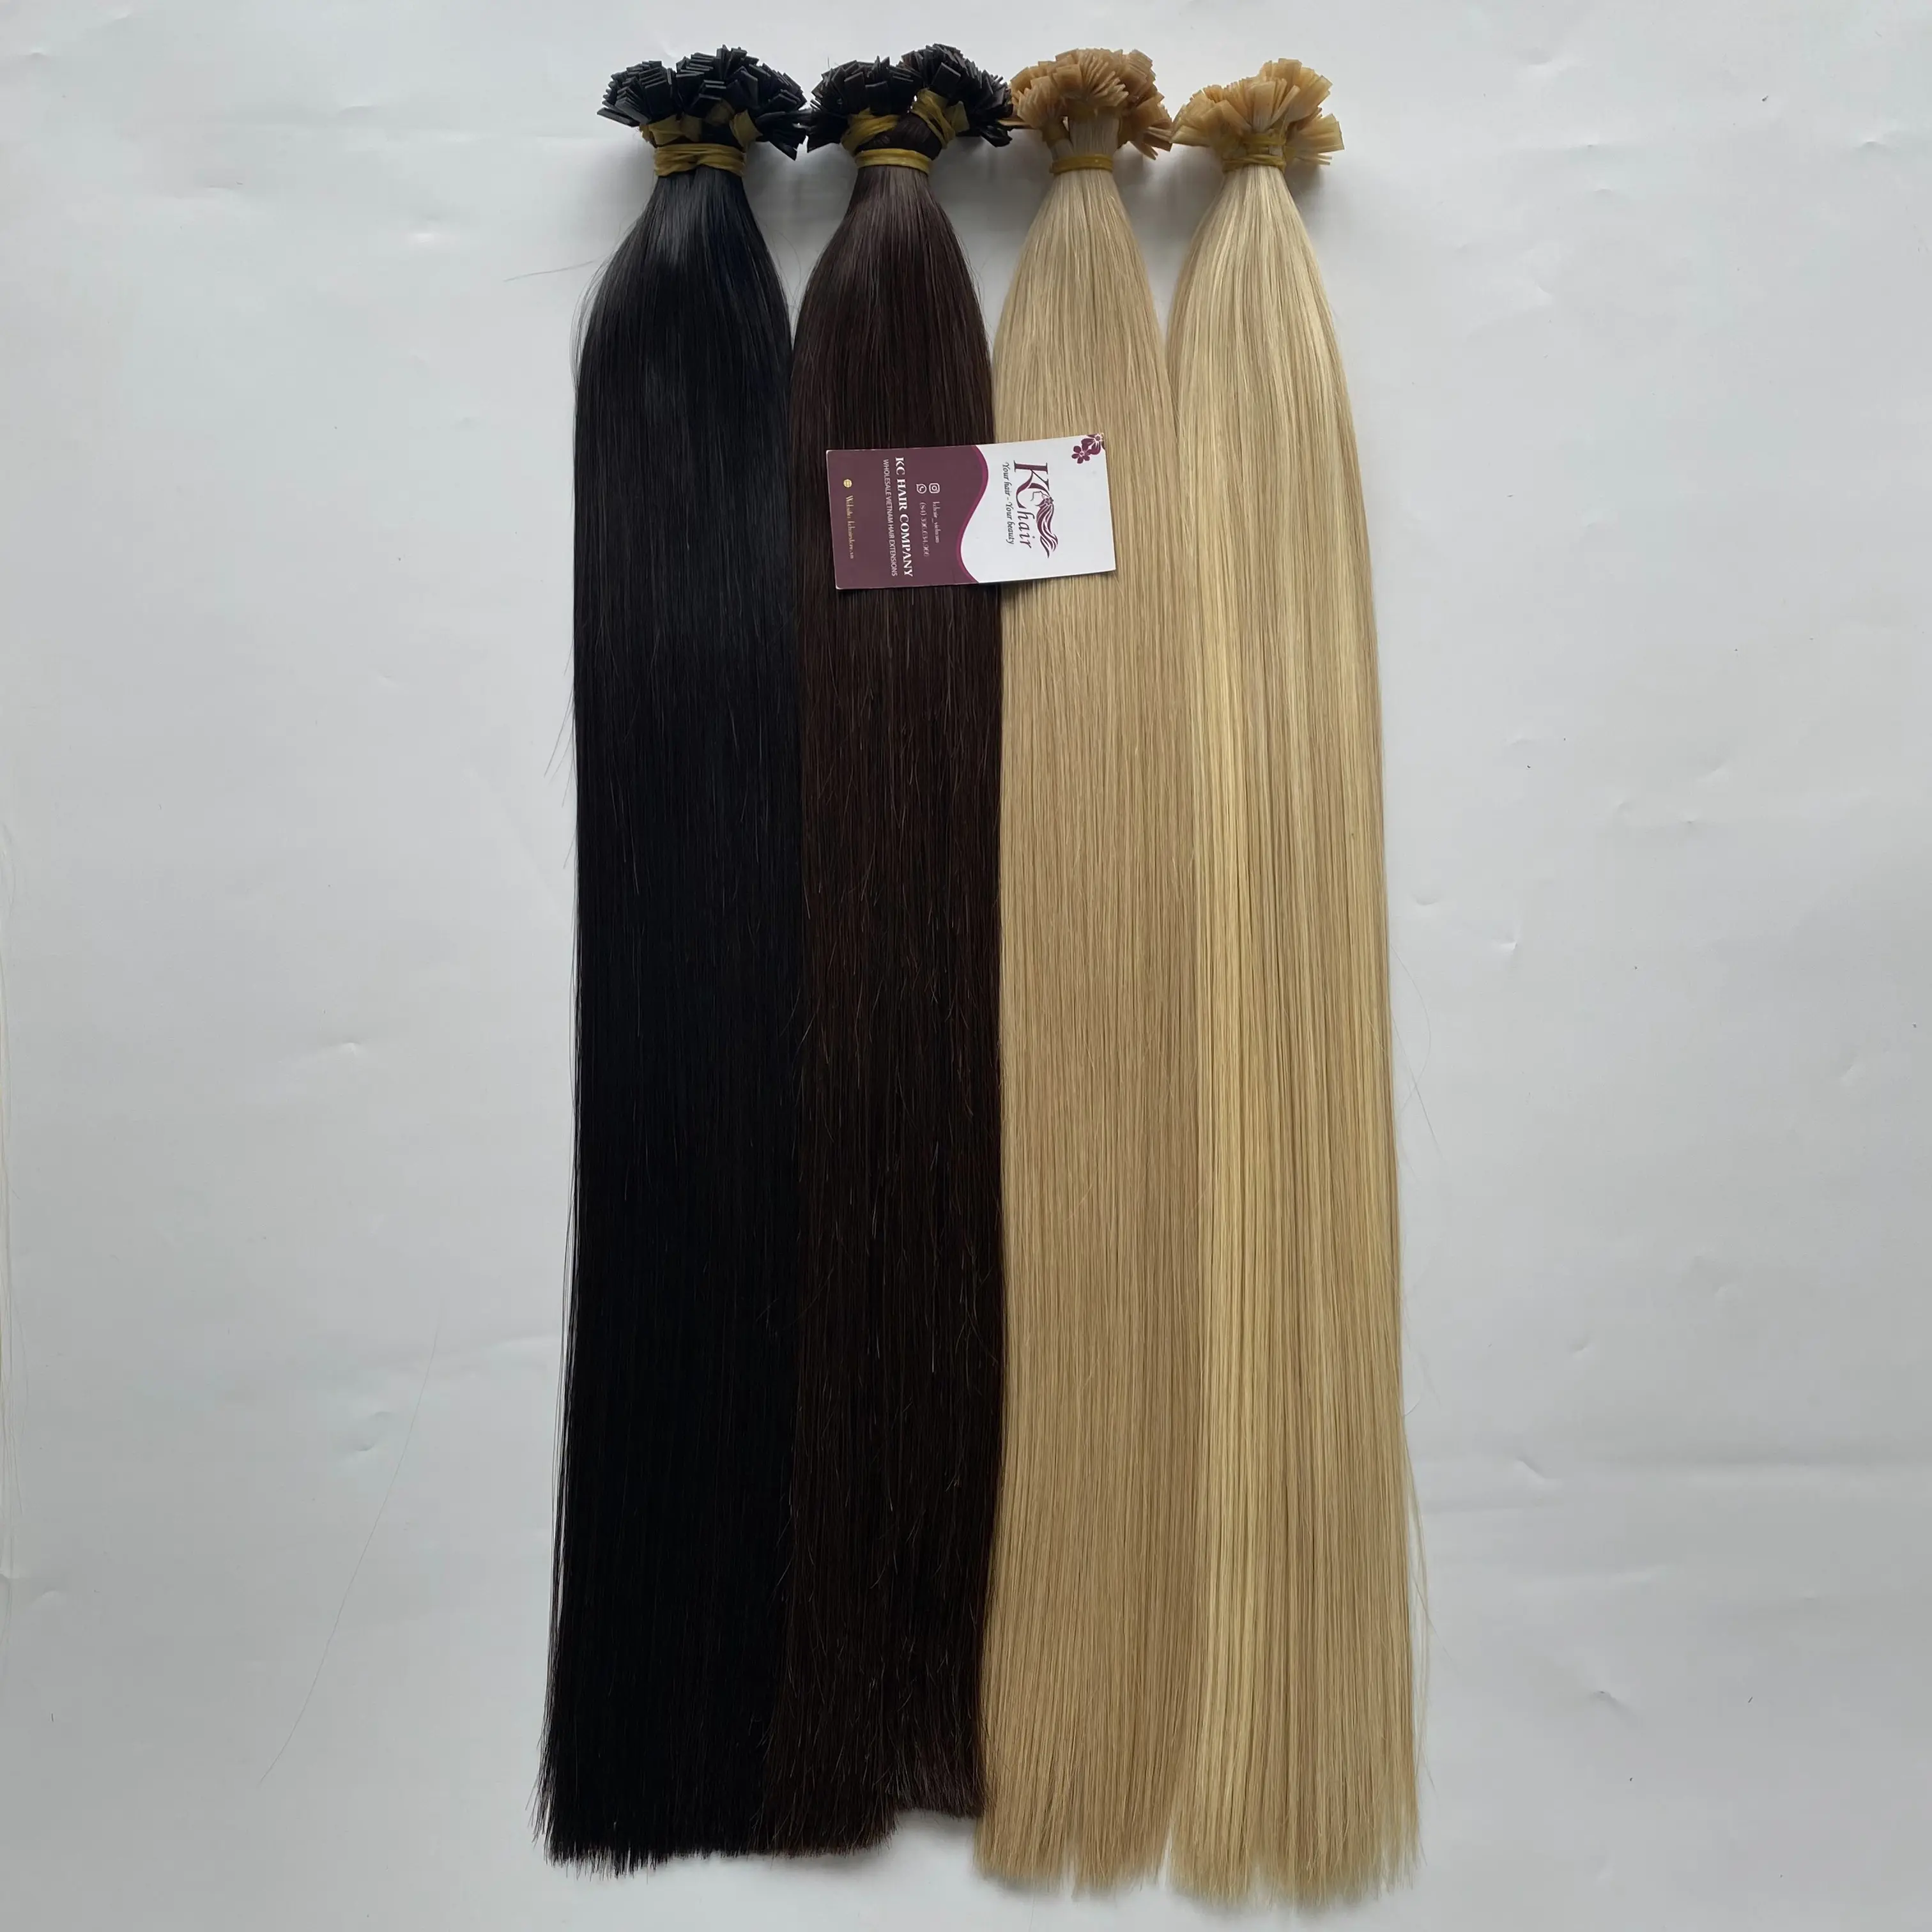 Keratin Flat Tip Hair Extensions Customized Color Unprocessed Vietnamese Raw Remy Human Hair Cheapest Price